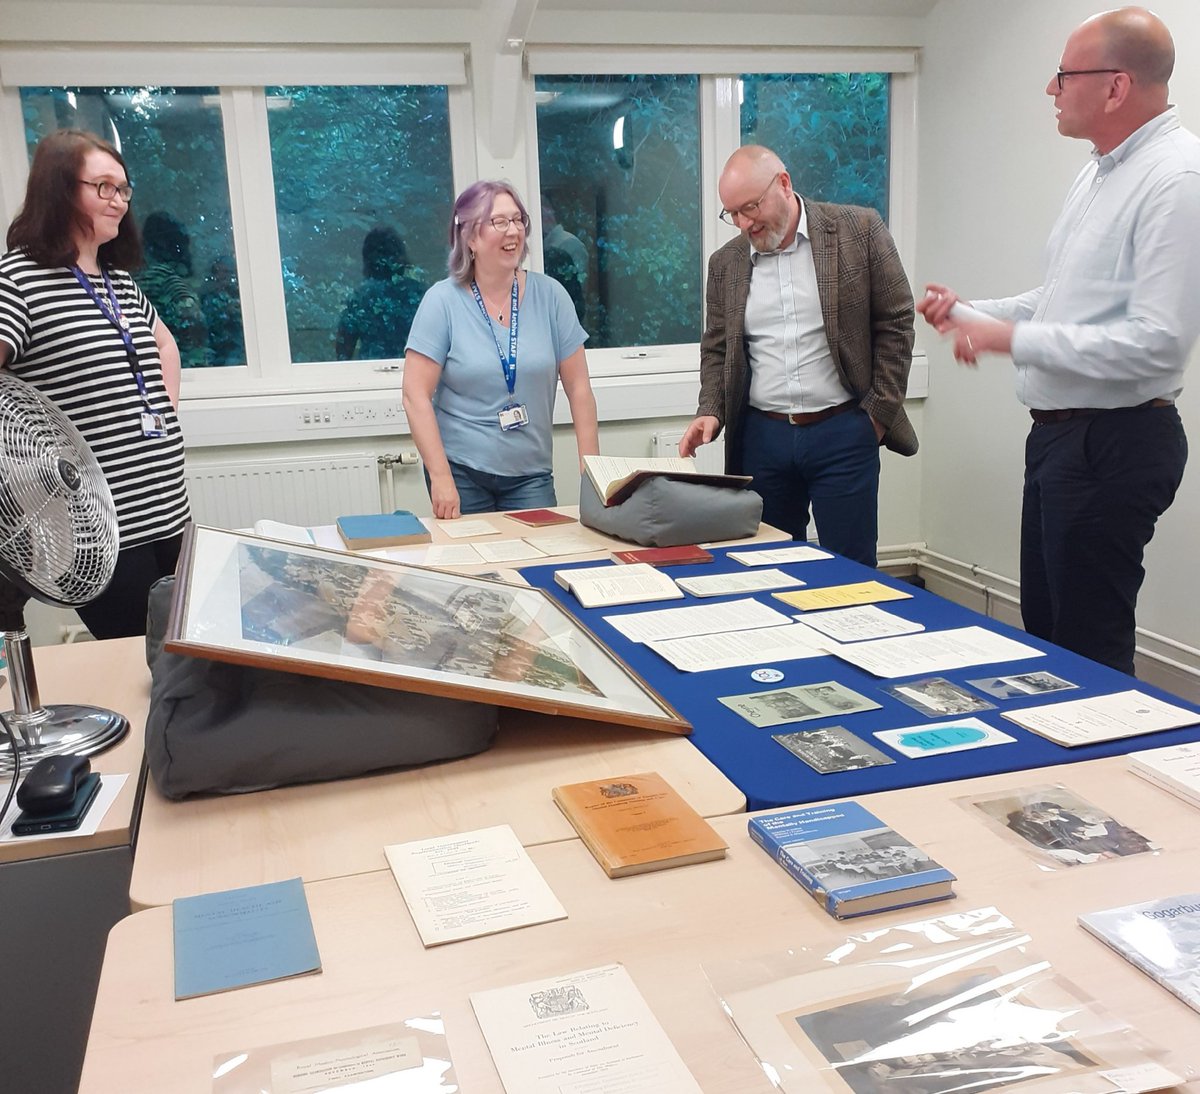 Fantastic archive session & display exploring the history of learning disability nursing in Scotland with @RCNLibraries Archive team and @scott_taylor70 at launch of LD nursing exhibition @RCNScot 
Find out more rcn.org.uk/news-and-event…
@RcnLDForum @RCNHistory #histnursing @SLDNN6